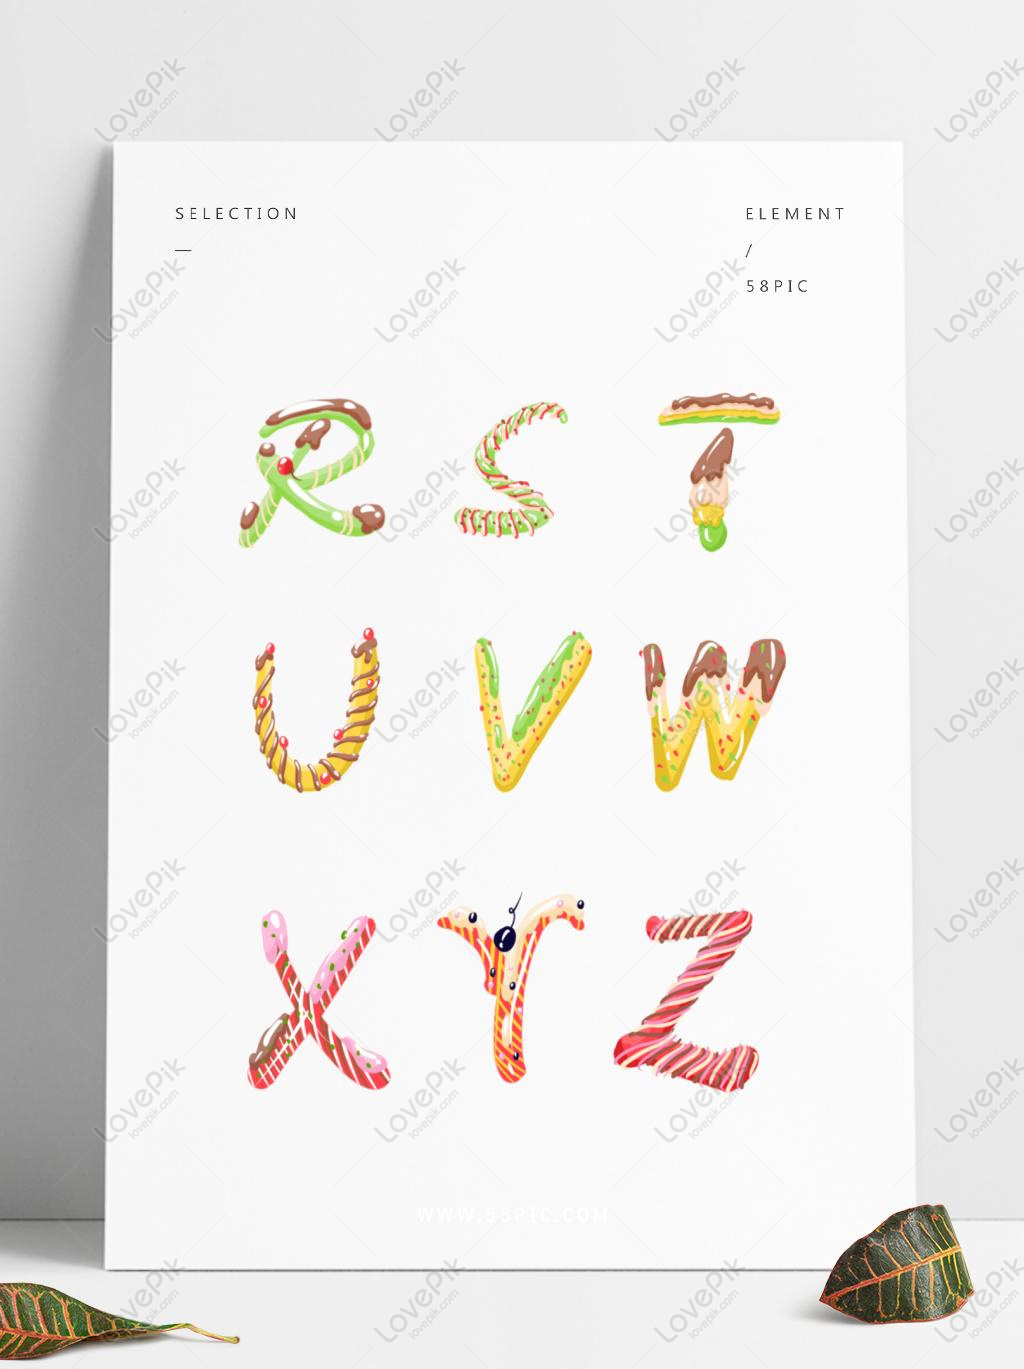 English Alphabet Hand Made Edible Letters Stock Photo 1277491483